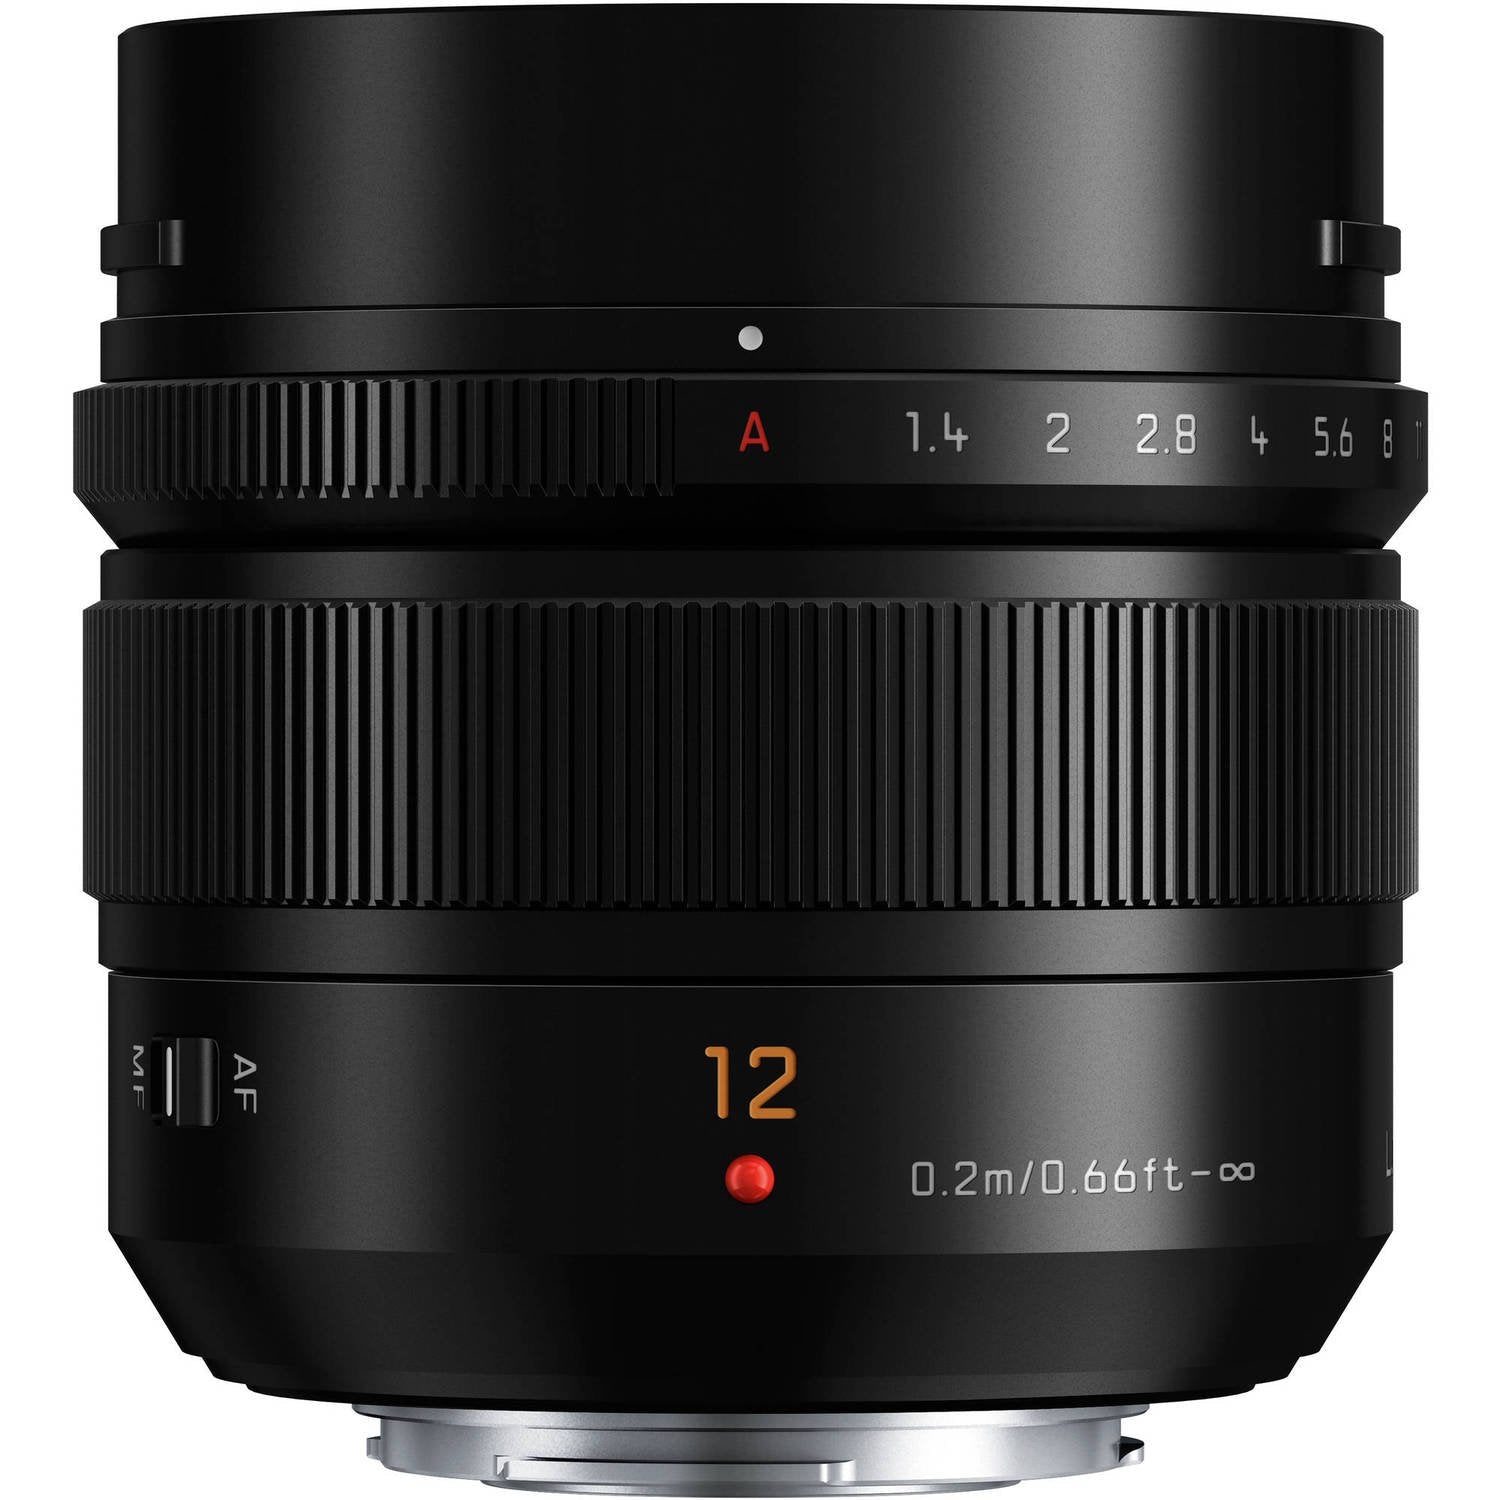 Panasonic Leica DG Summilux 12mm f/1.4 ASPH. Lens with Filter Kit, Lens Case and Cleaning Kit